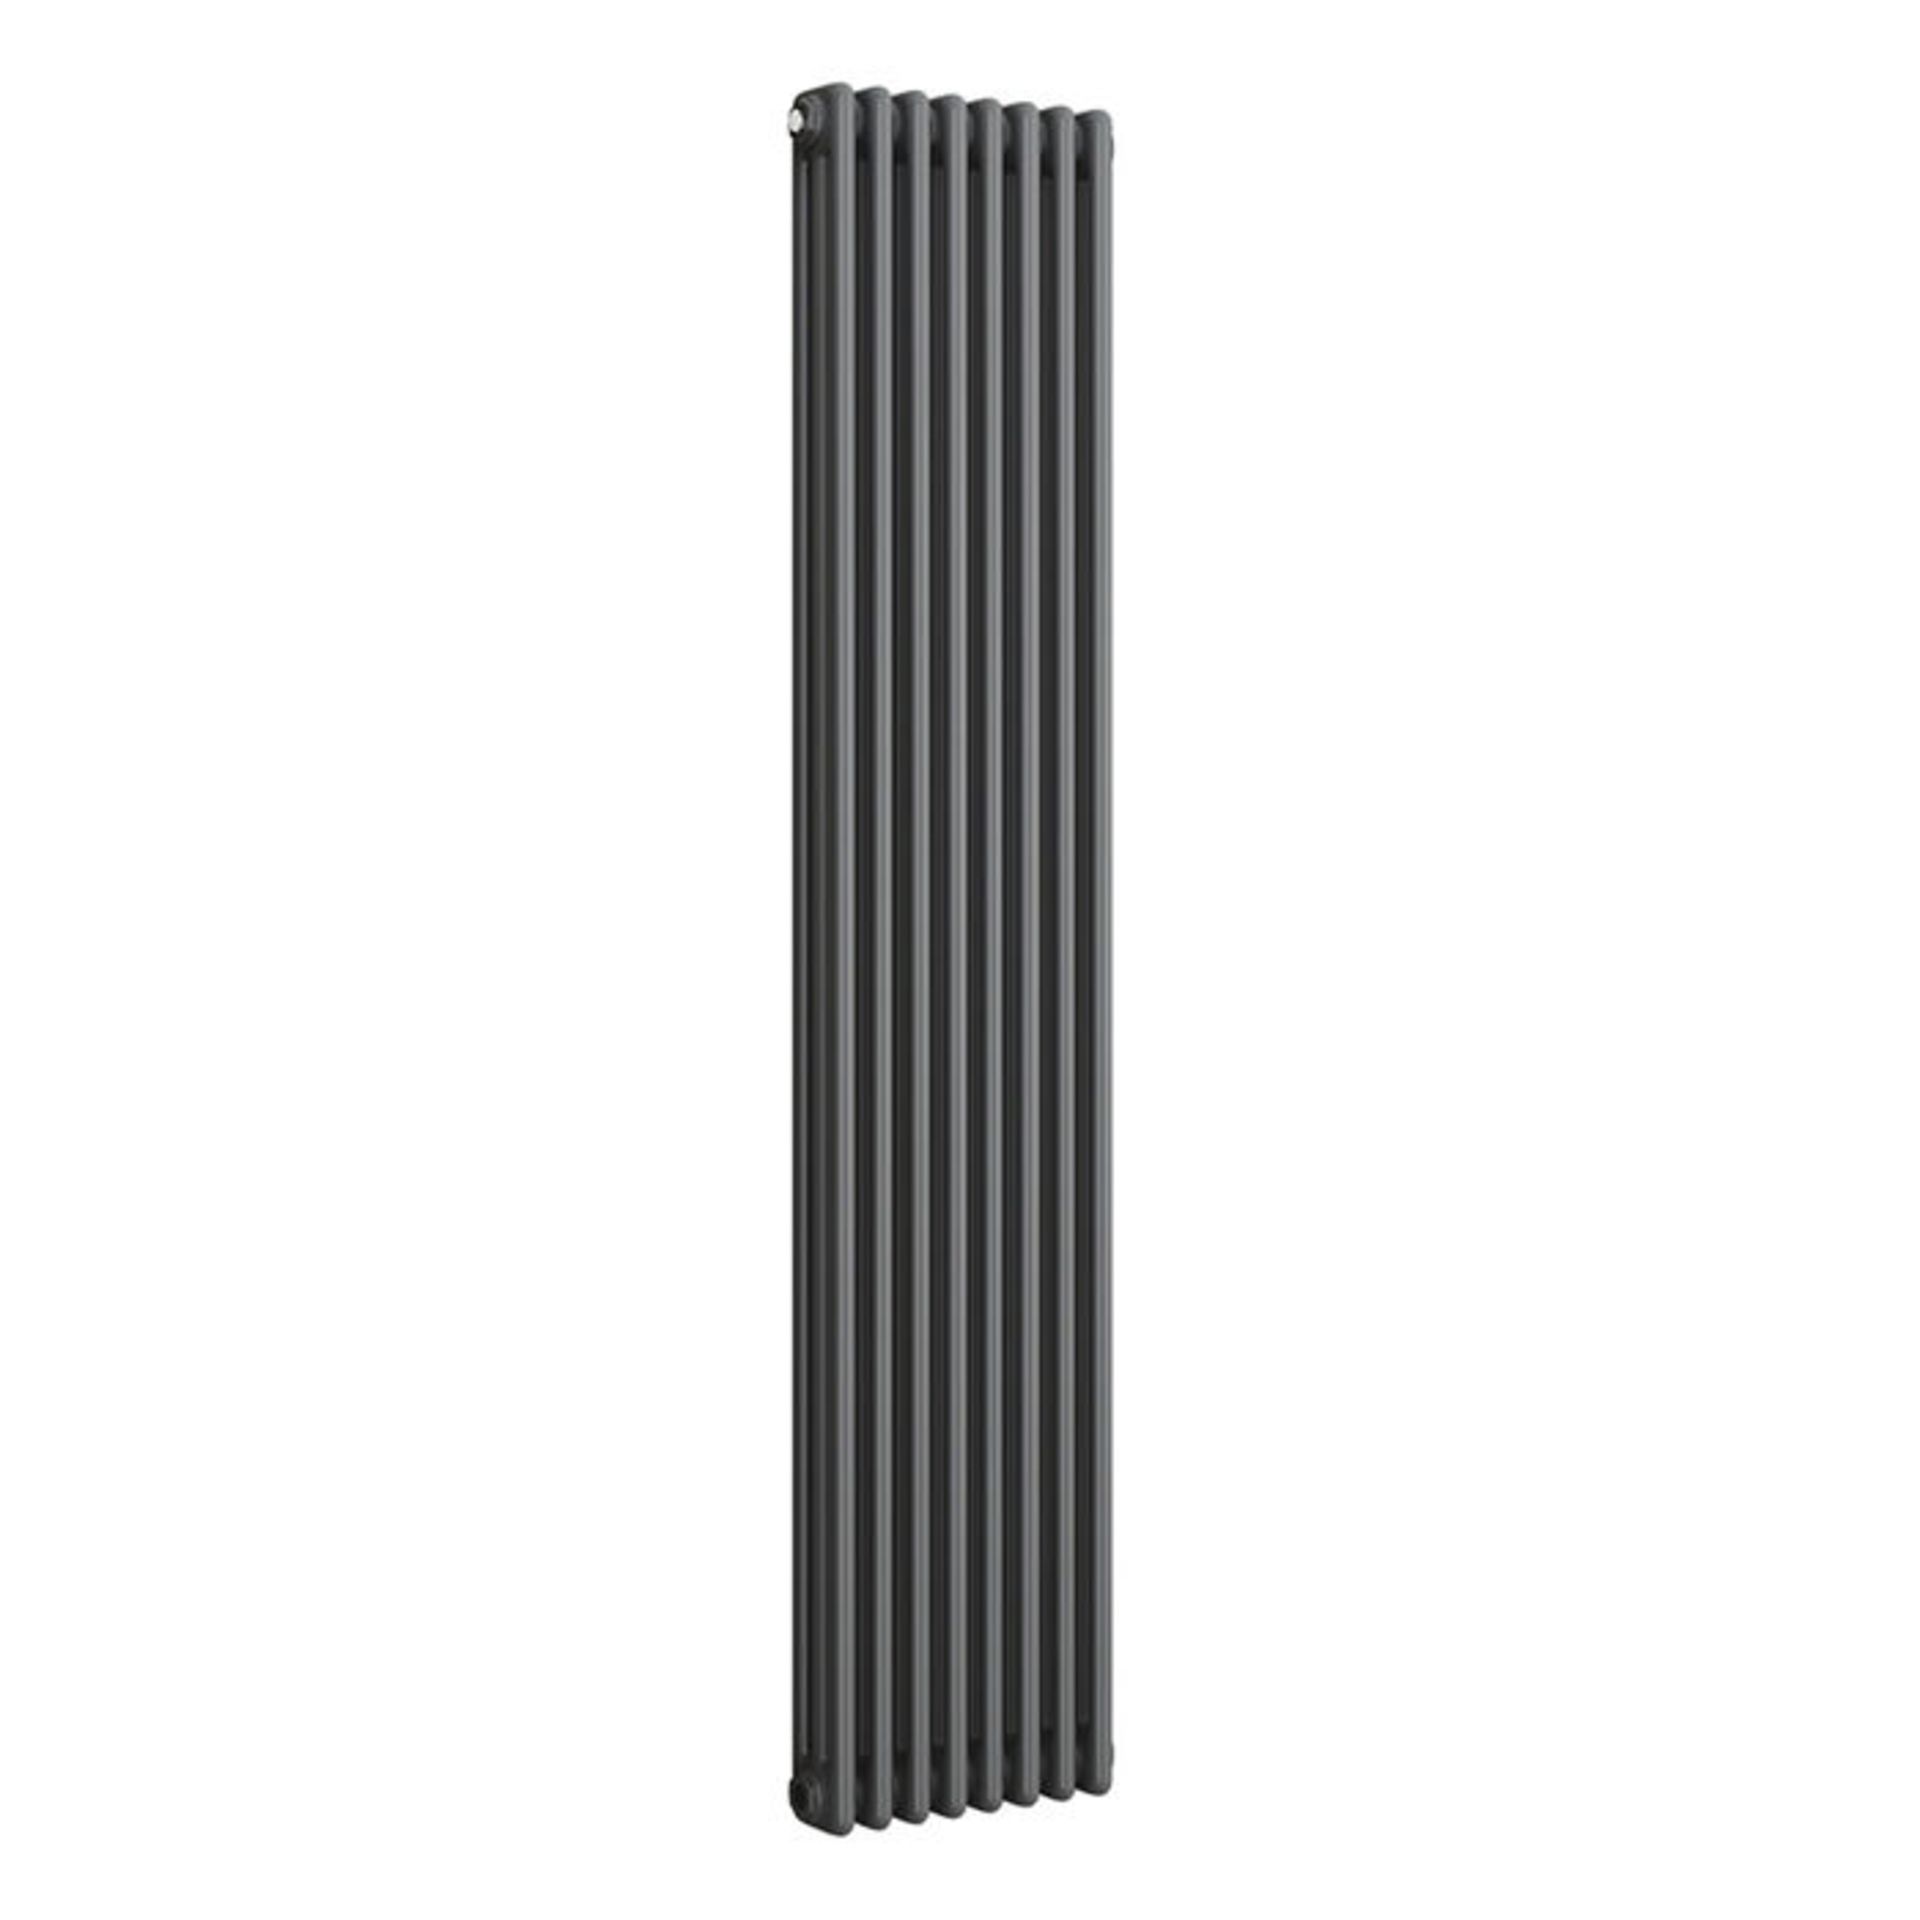 (Z18) 1800x290mm Anthracite Triple Panel Vertical Colosseum Traditional Radiator. RRP £399.99.... - Image 3 of 3